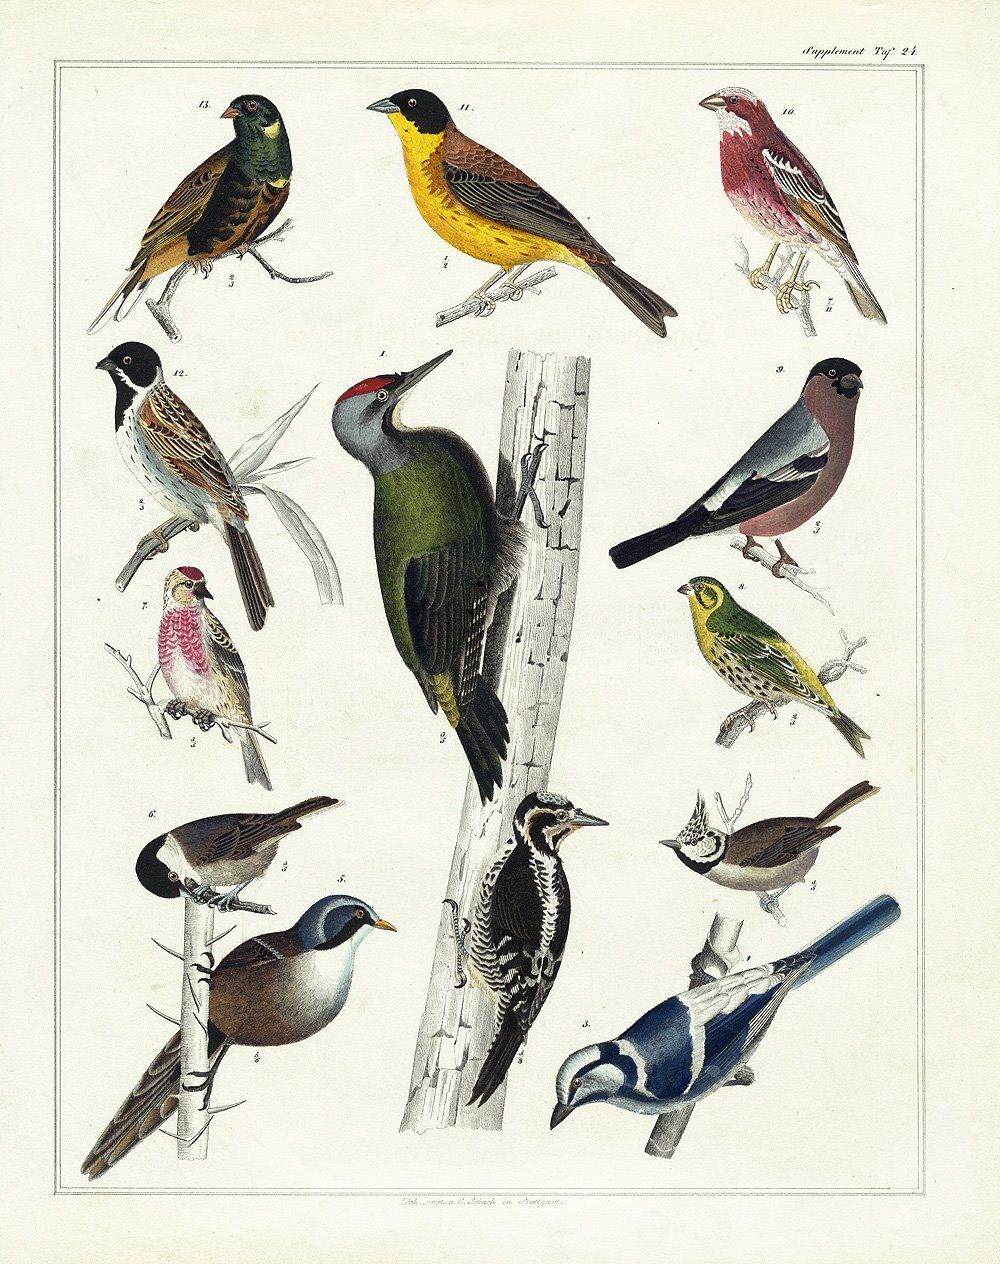 Over 25 Free Vintage Bird Printable Images | Remodelaholic #art - Free Printable Images Of Birds